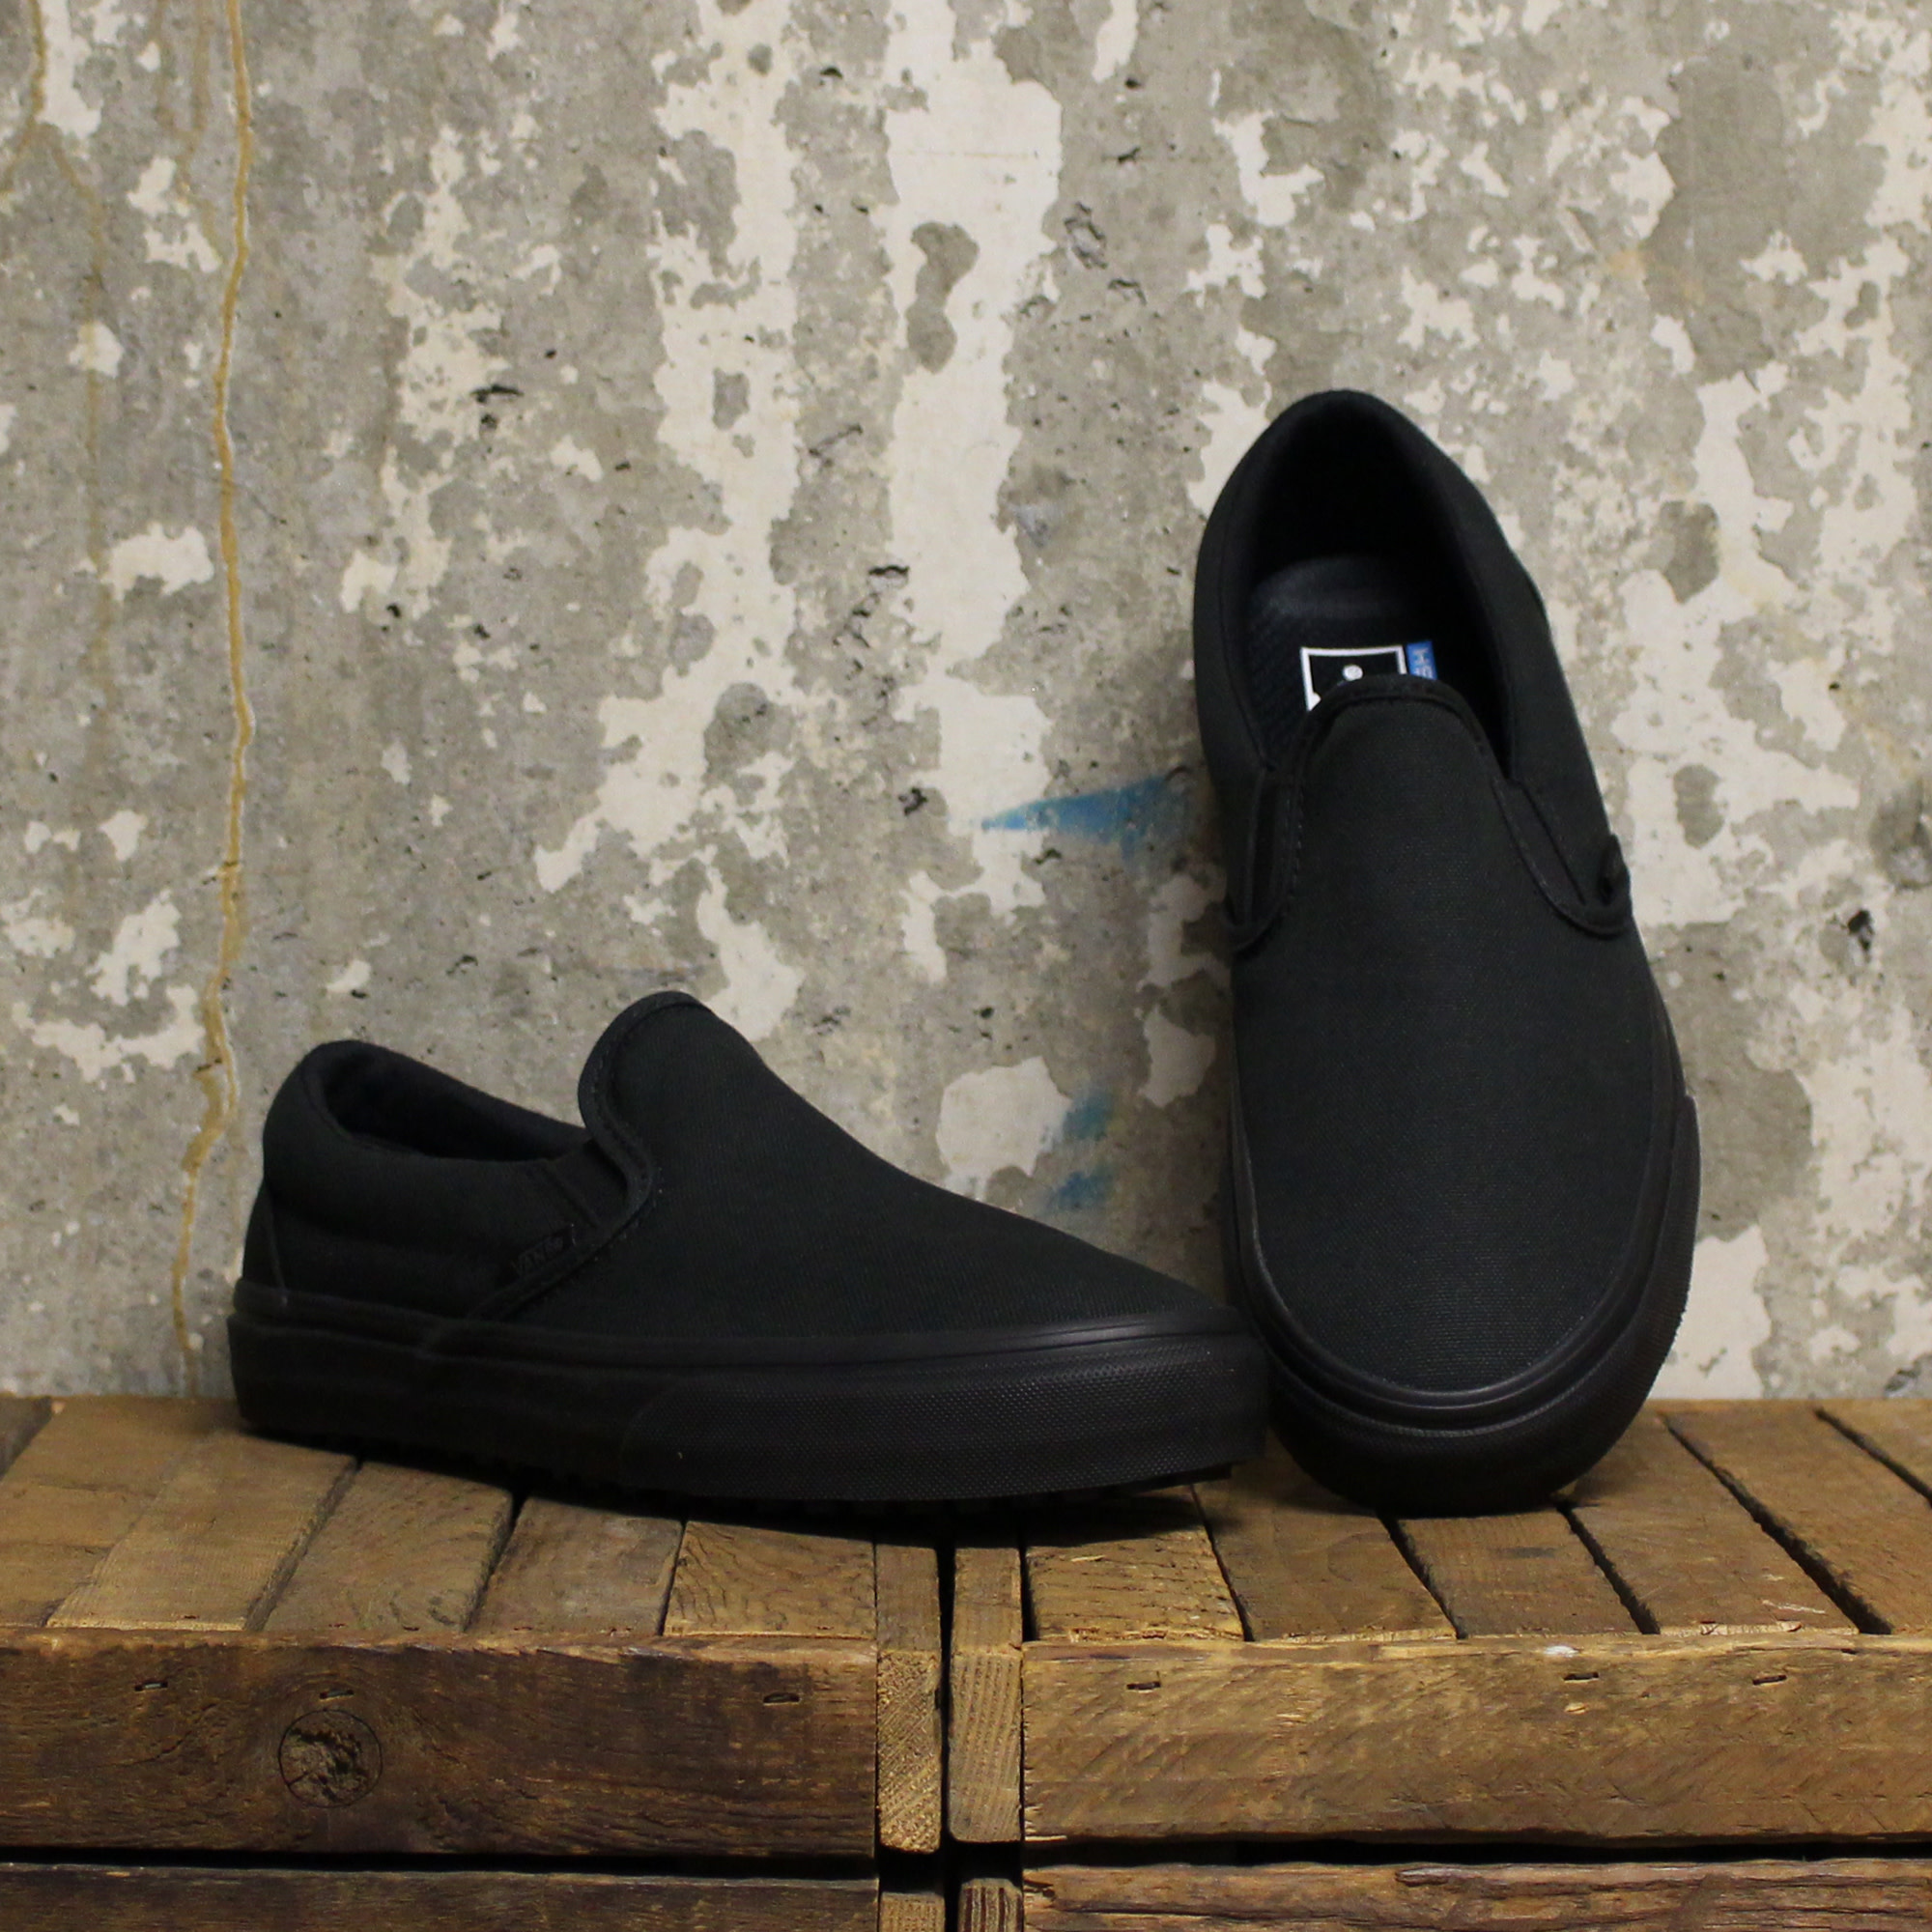 Vans Classic Slip-On UC (Made for the 